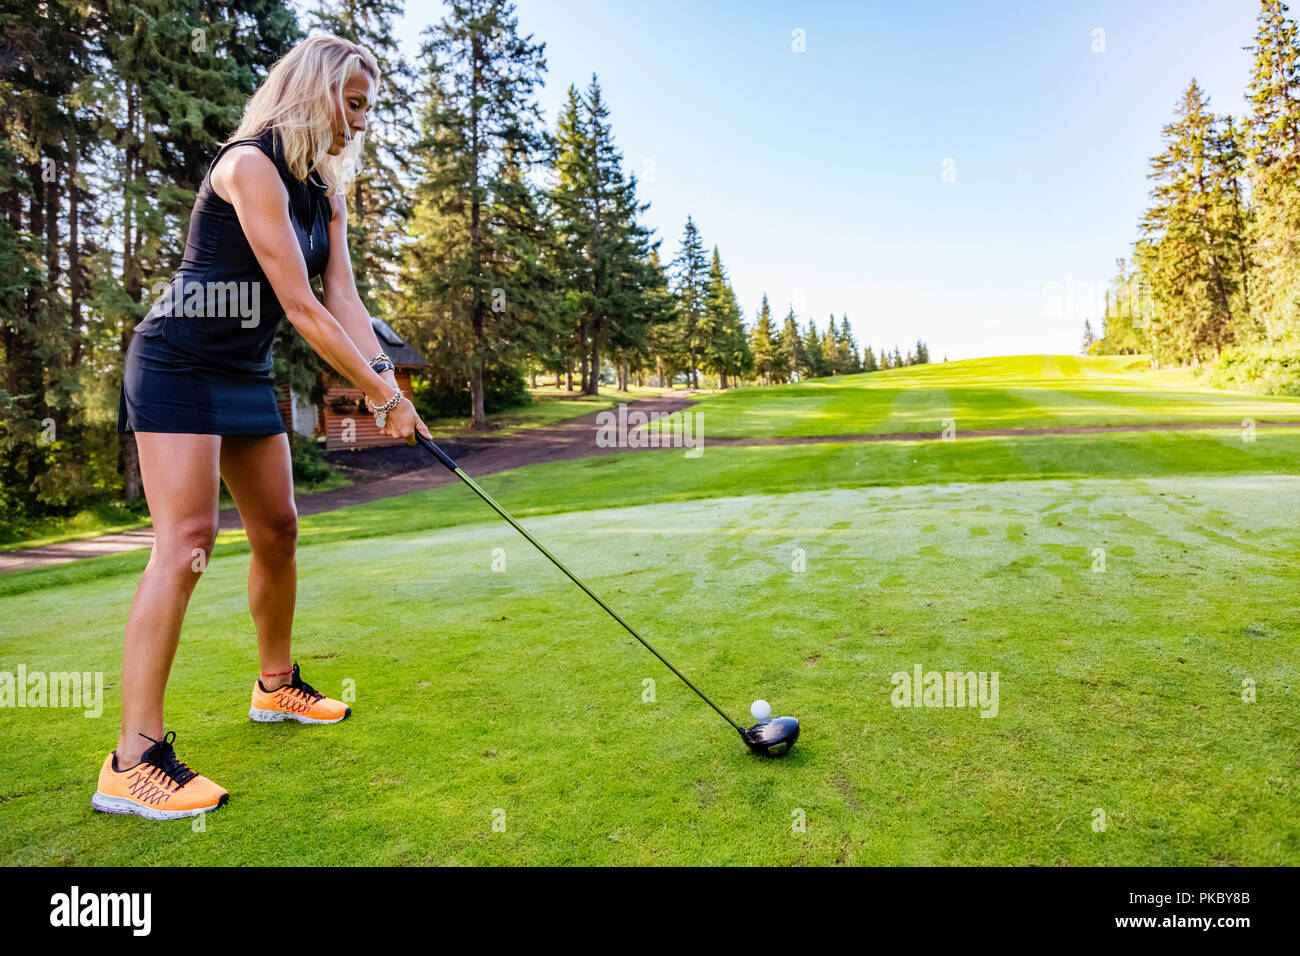 A female golfer lines up her driver to the golf ball on the tee with a view  of the fairway in the distance; Edmonton, Alberta, Canada Stock Photo -  Alamy